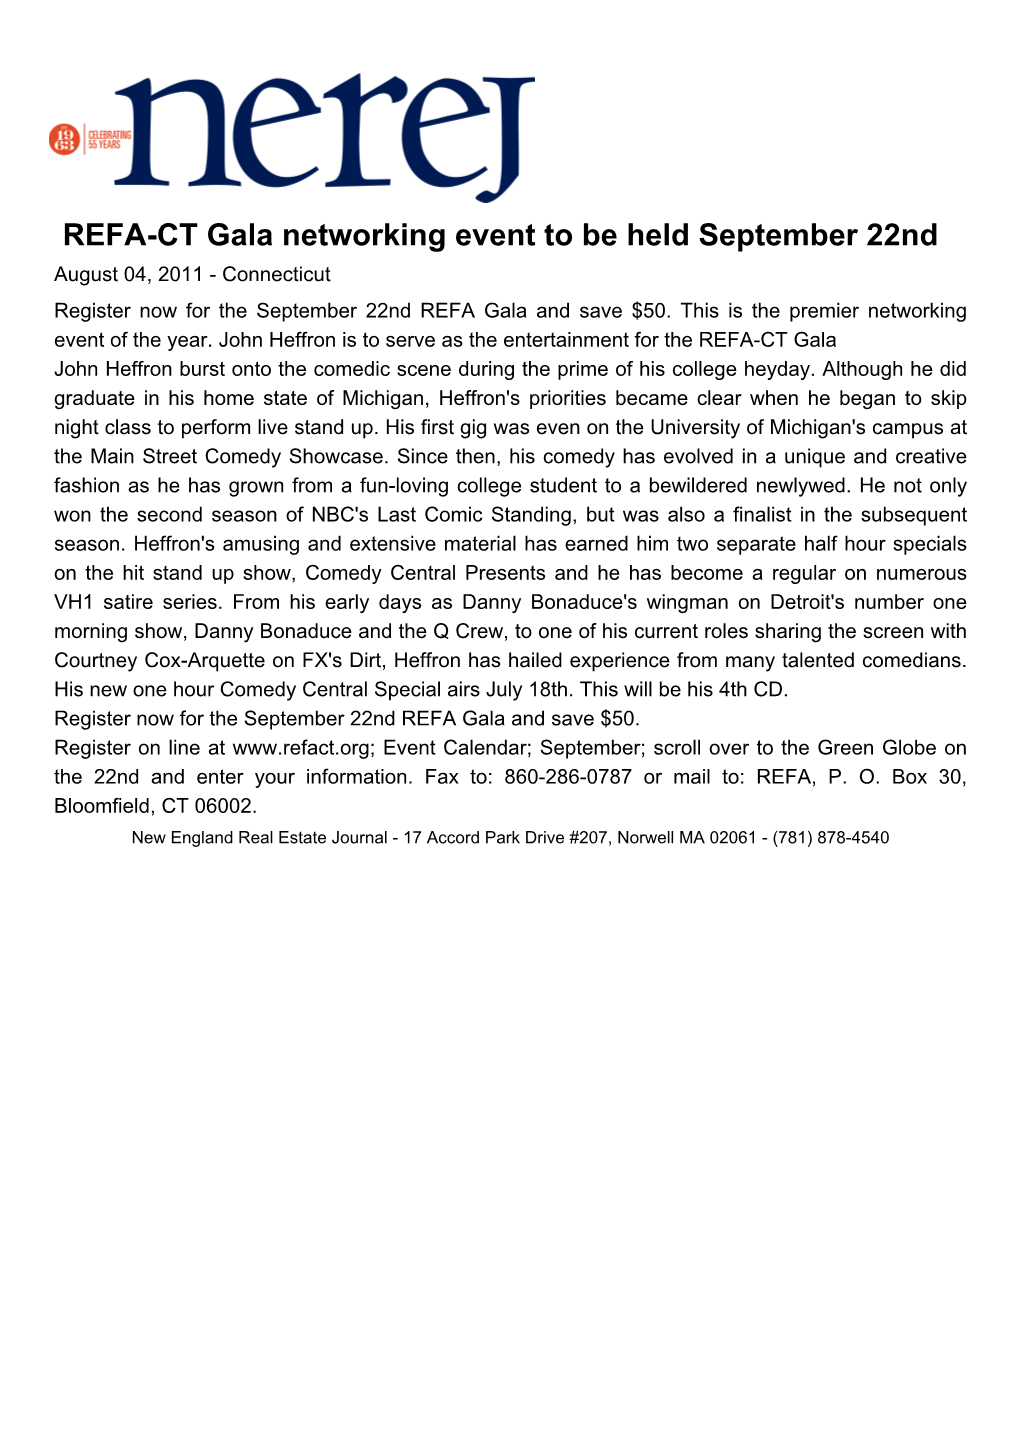 REFA-CT Gala Networking Event to Be Held September 22Nd August 04, 2011 - Connecticut Register Now for the September 22Nd REFA Gala and Save $50